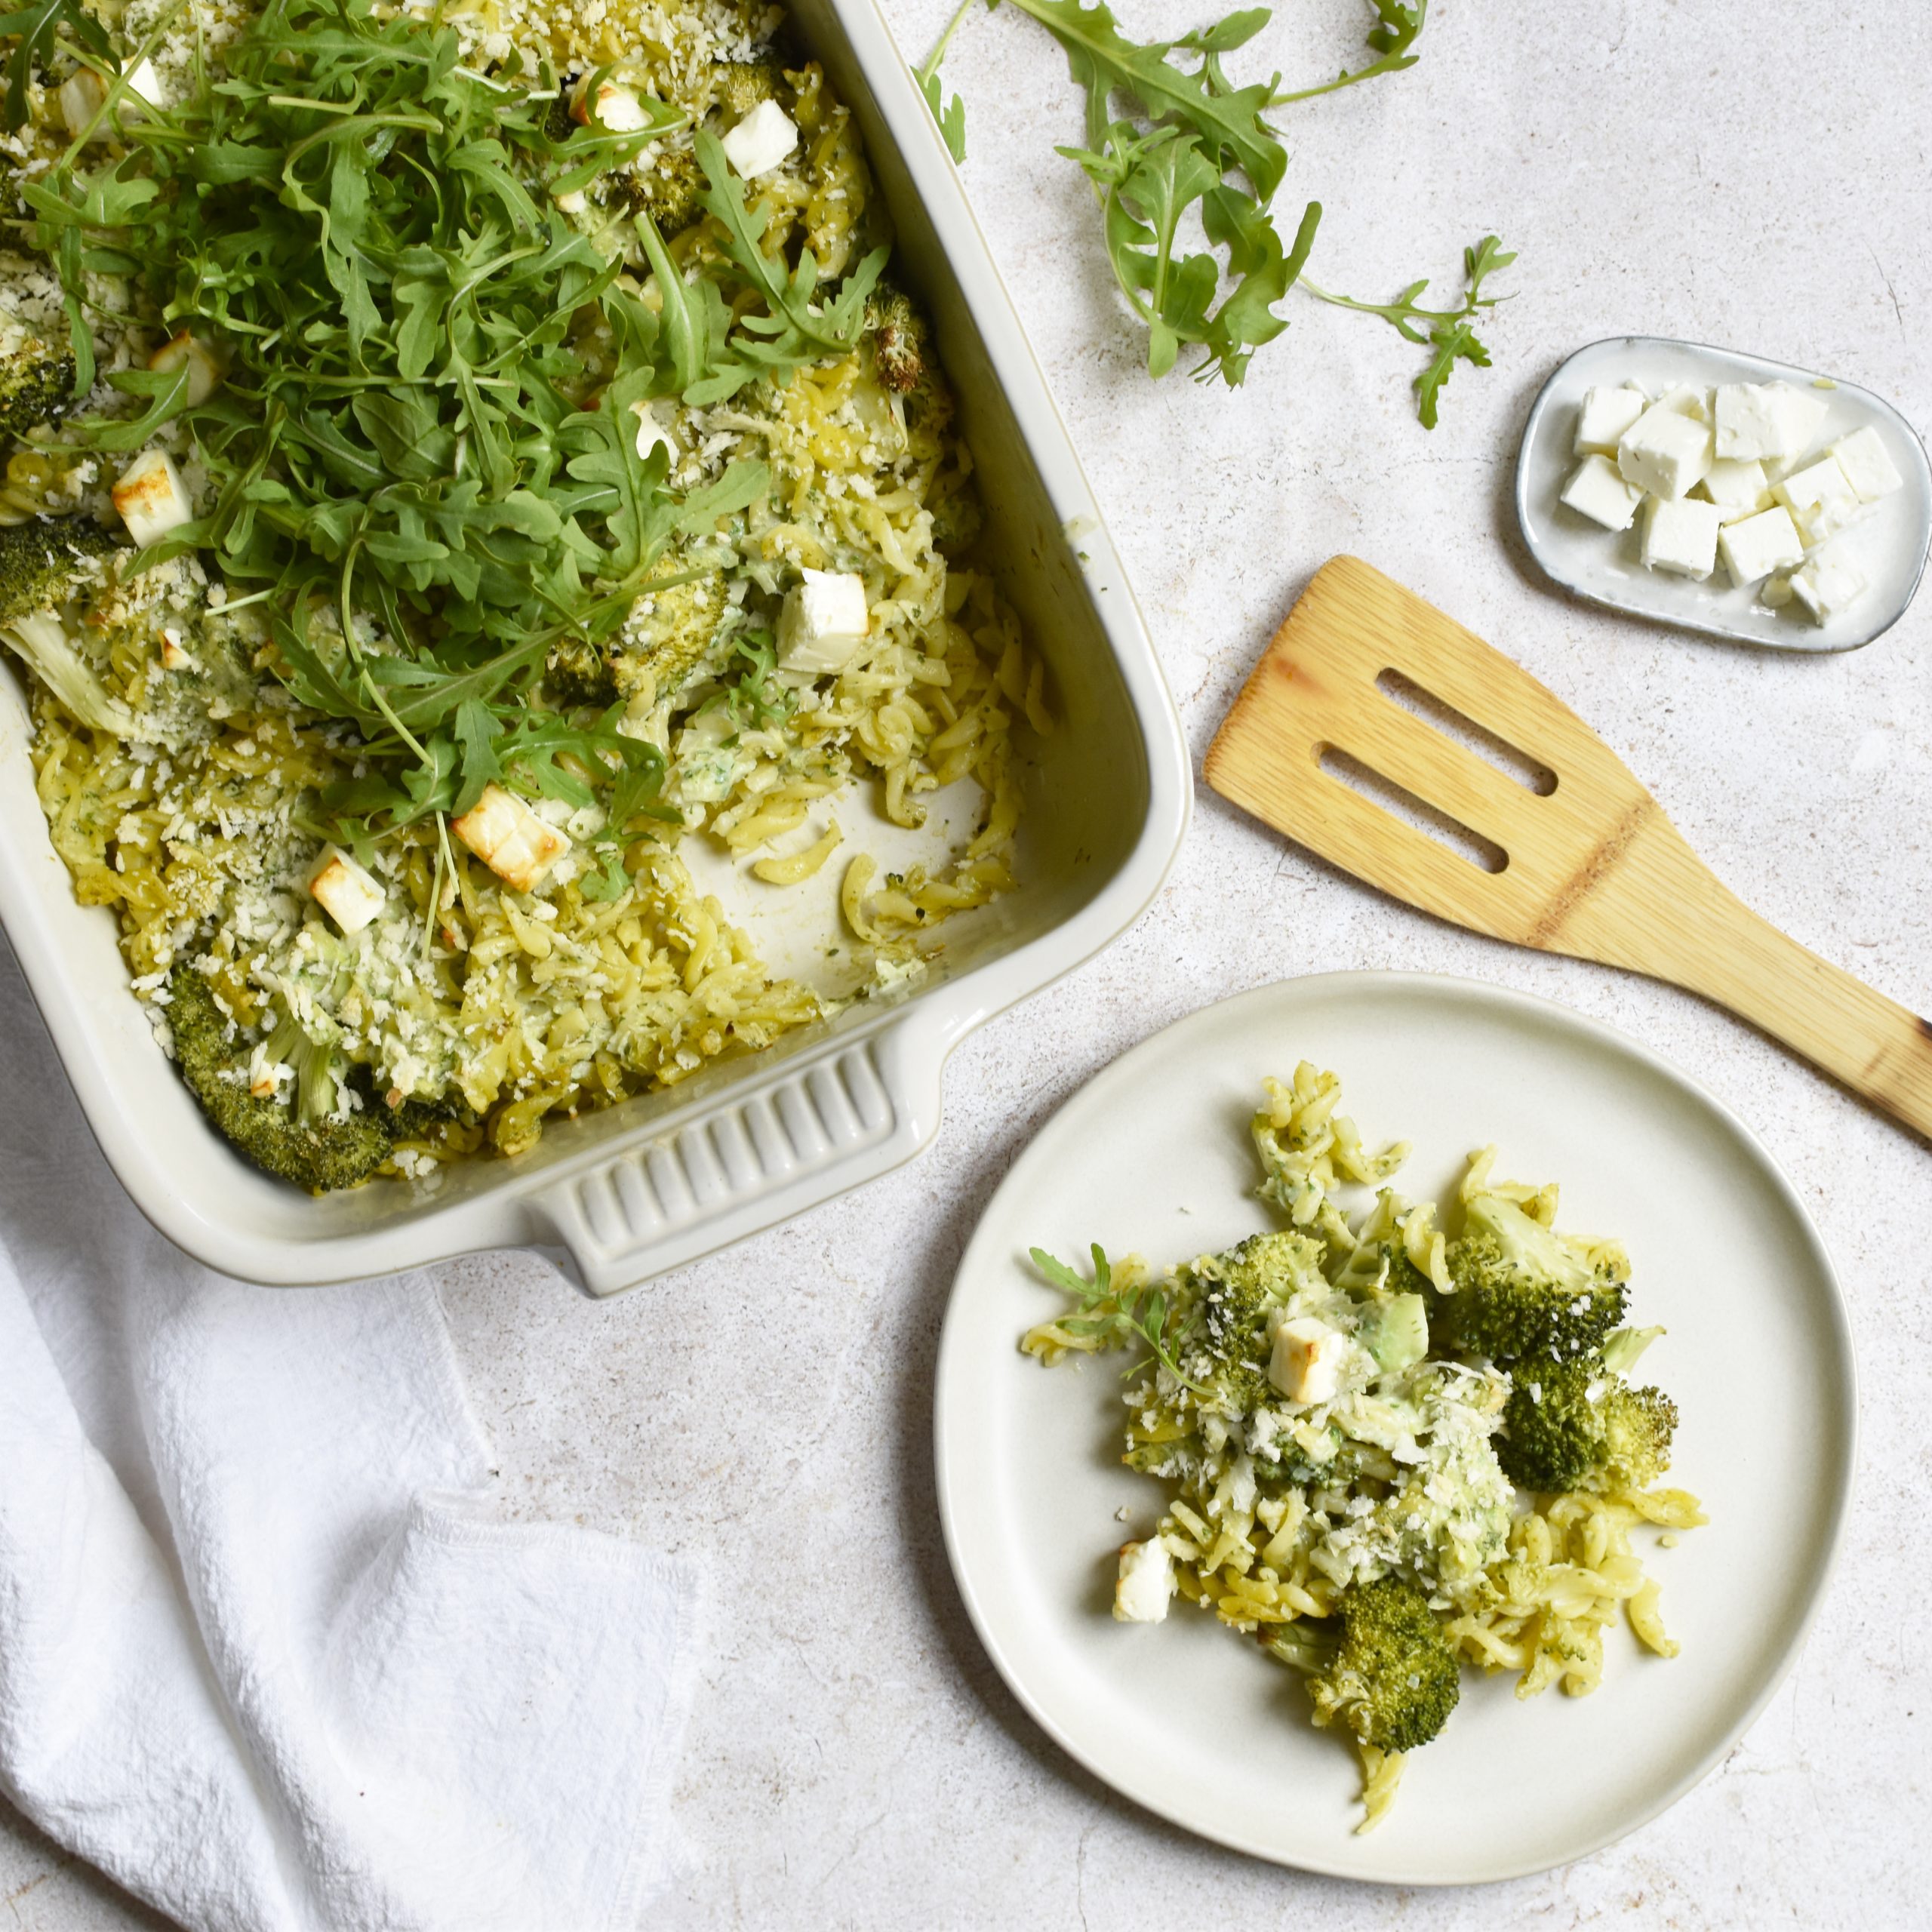 Baked pasta with broccoli, pesto and feta - Anne Travel Foodie